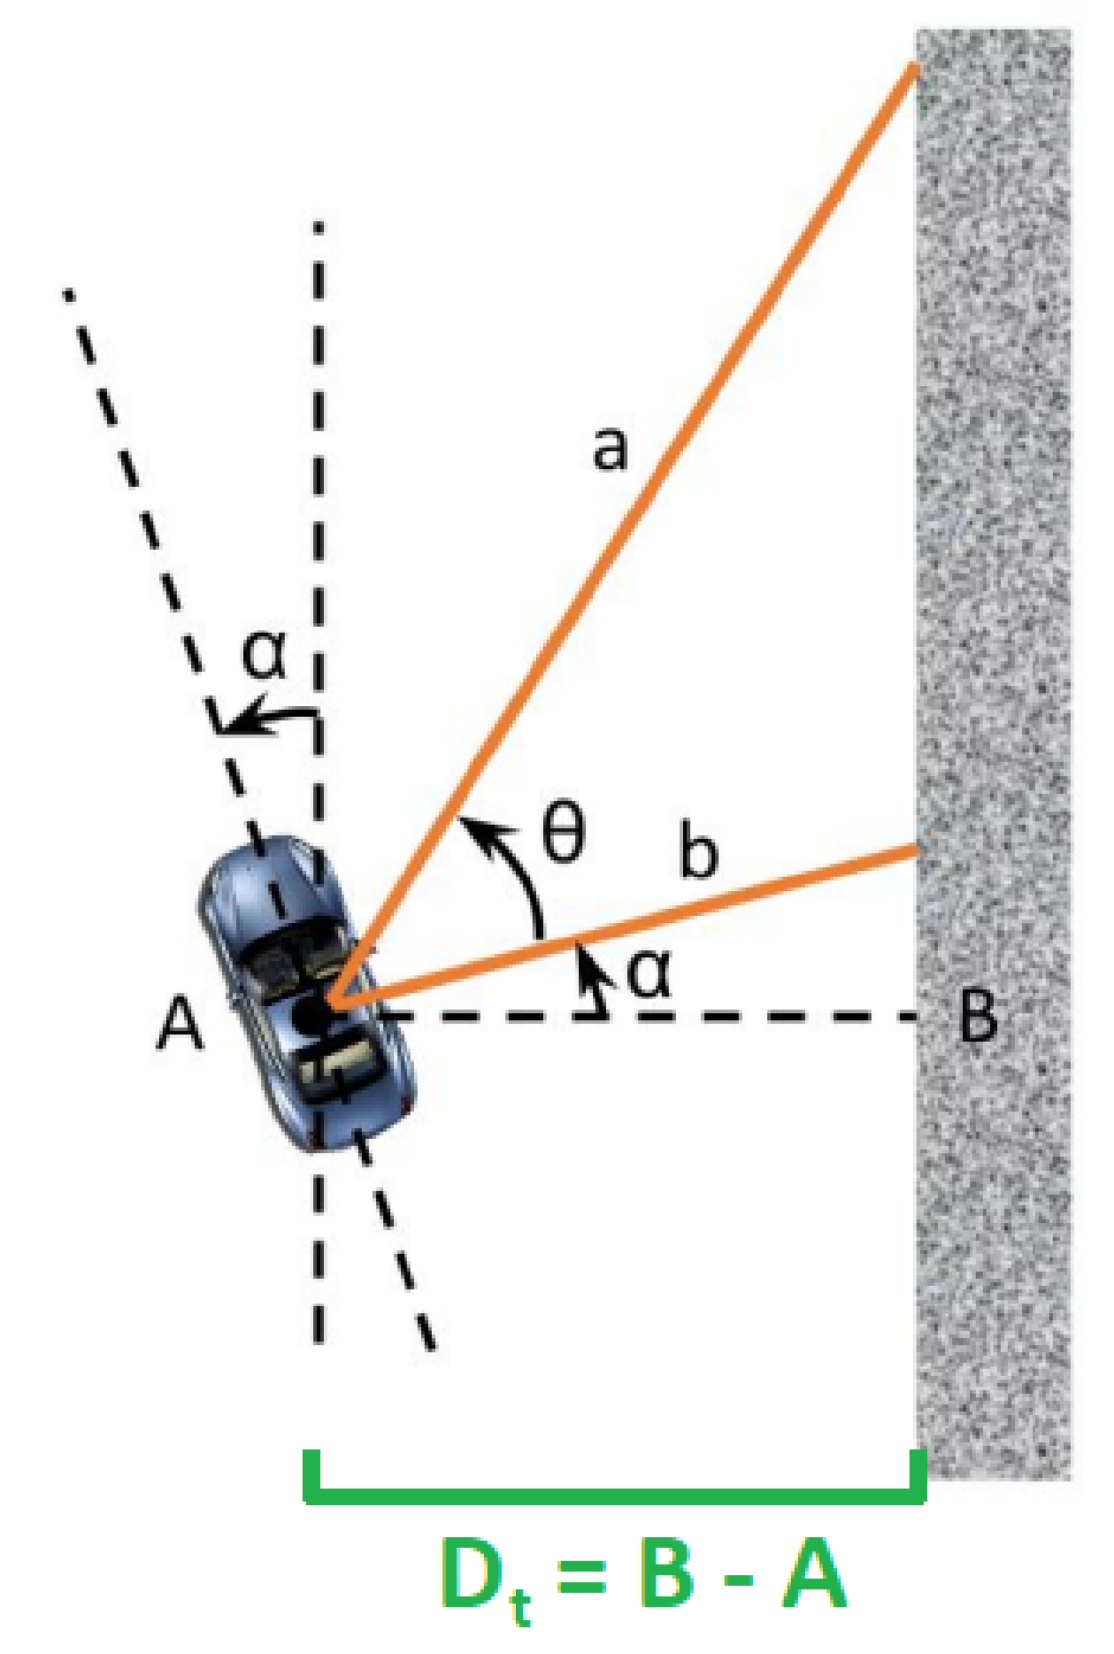 Distance and orientation of the car relative to the wall.